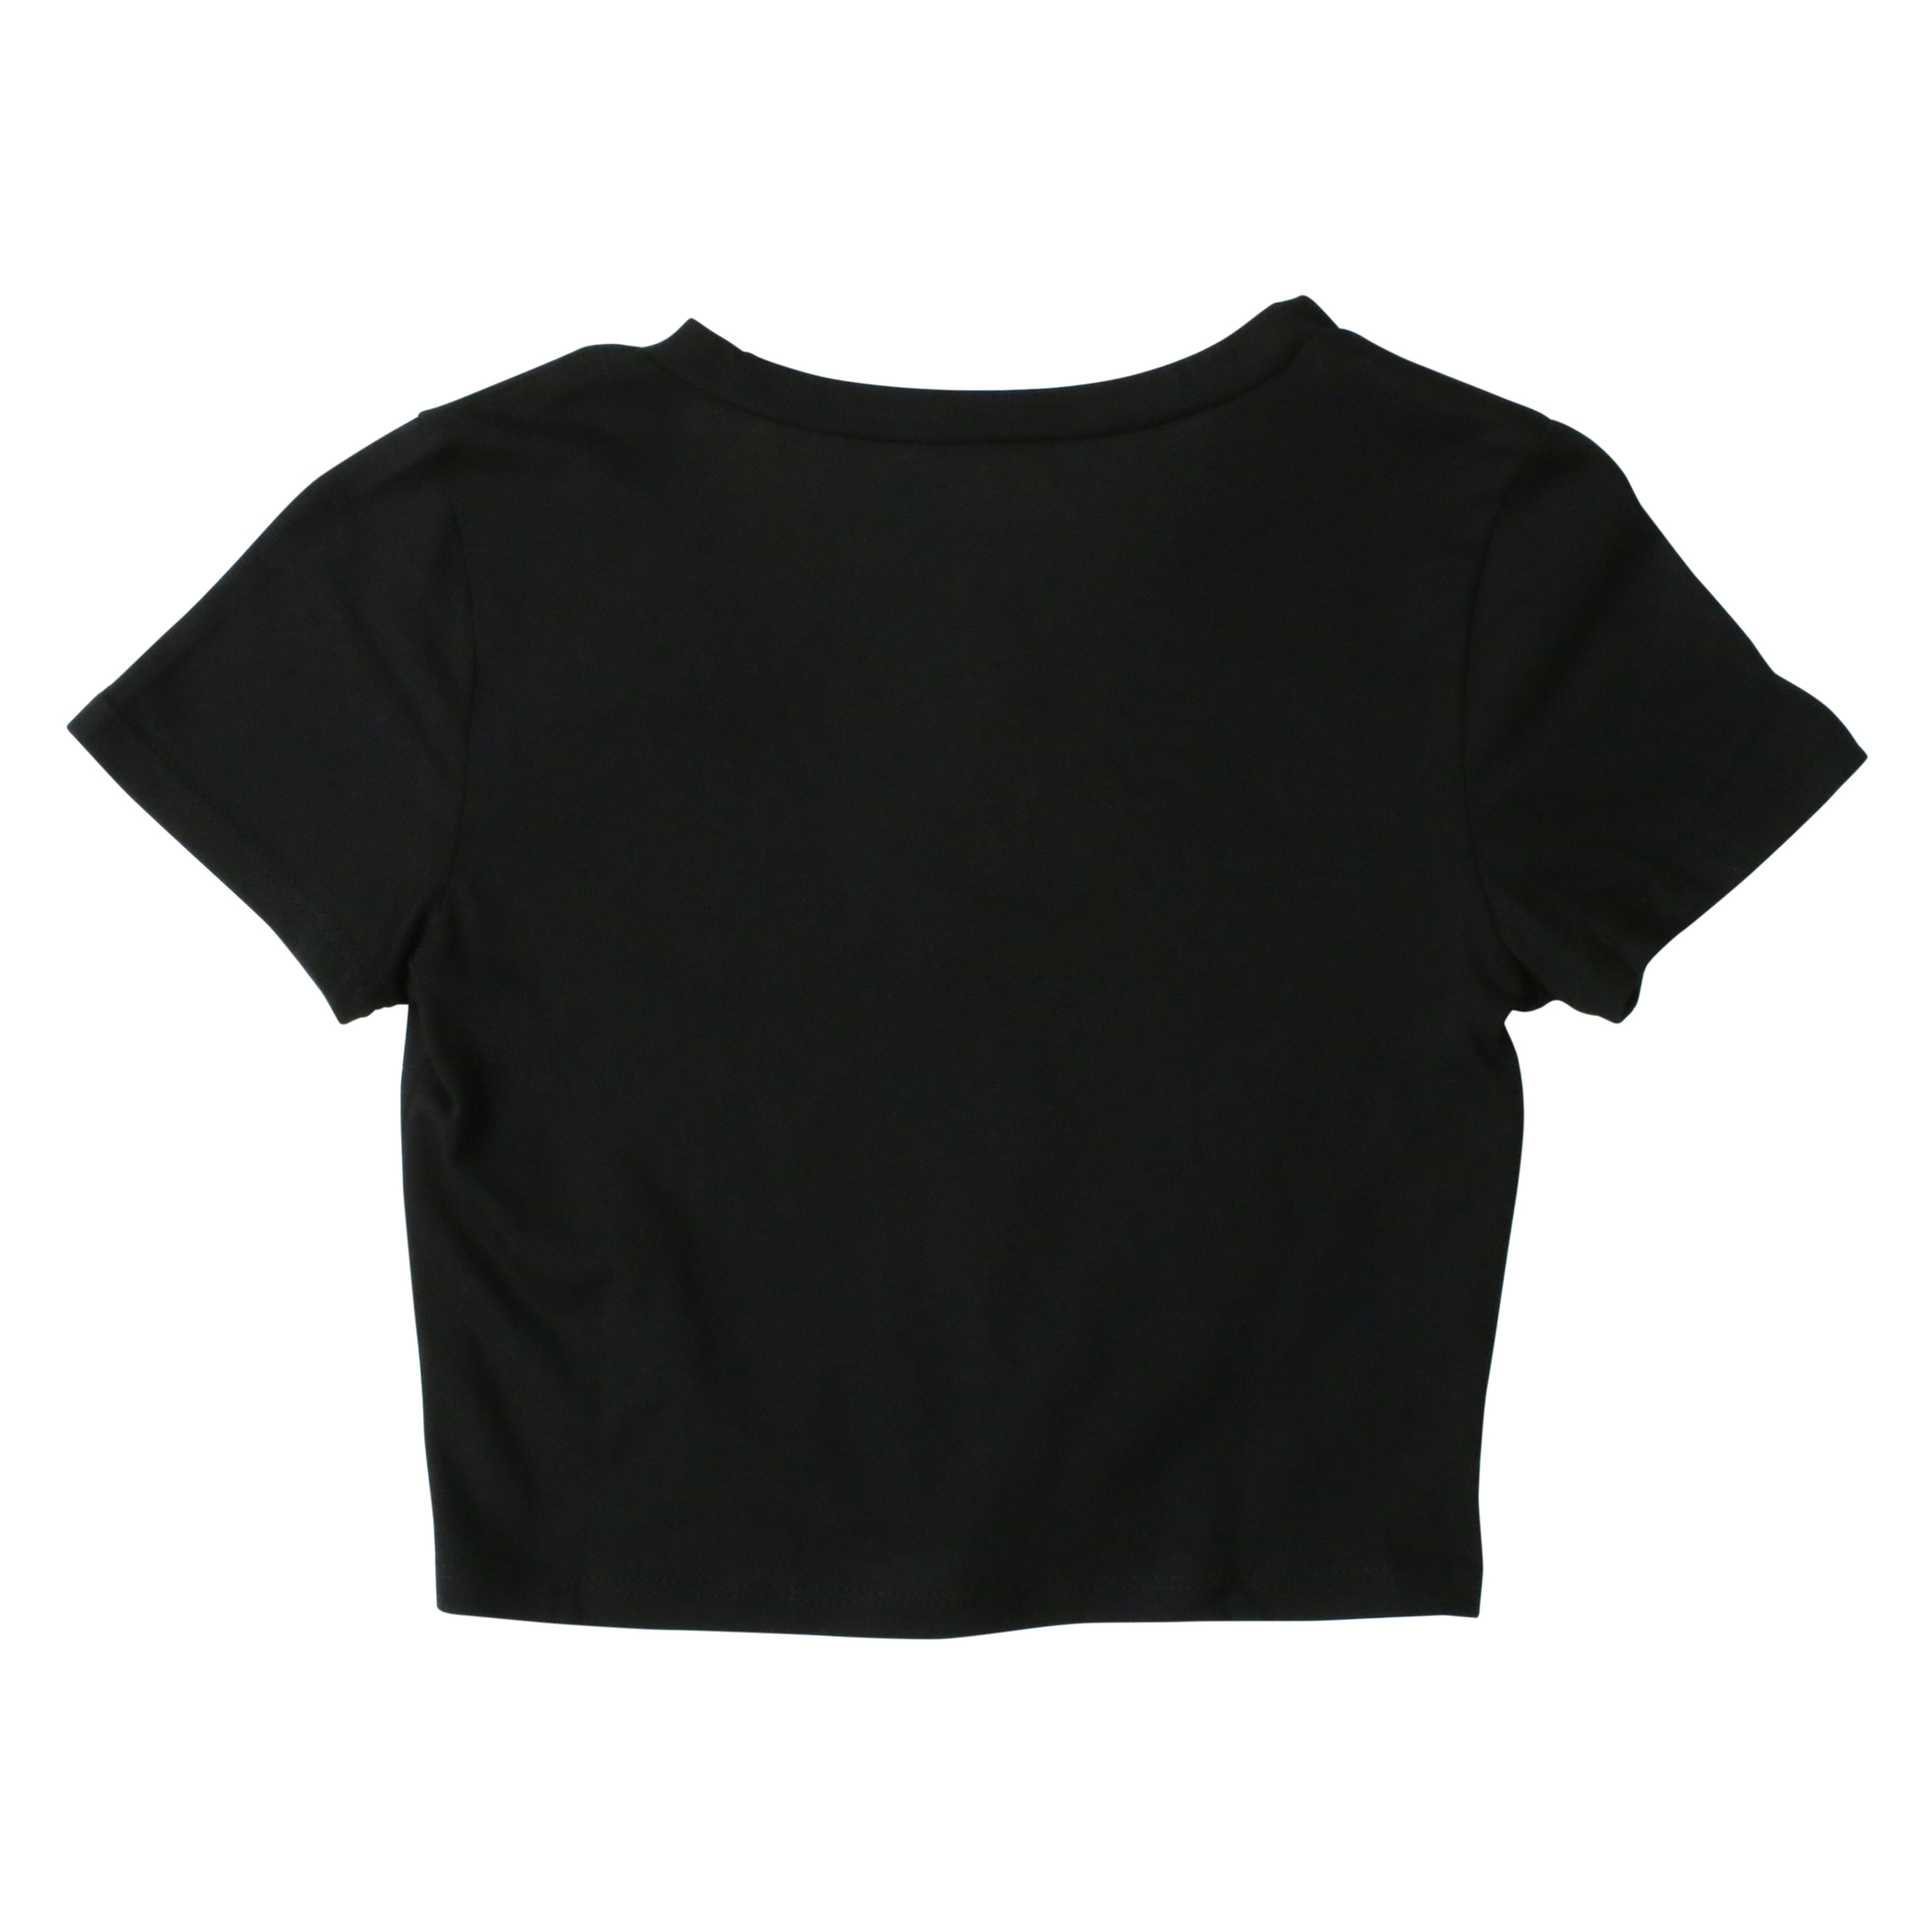 black v-neck active top with front knot